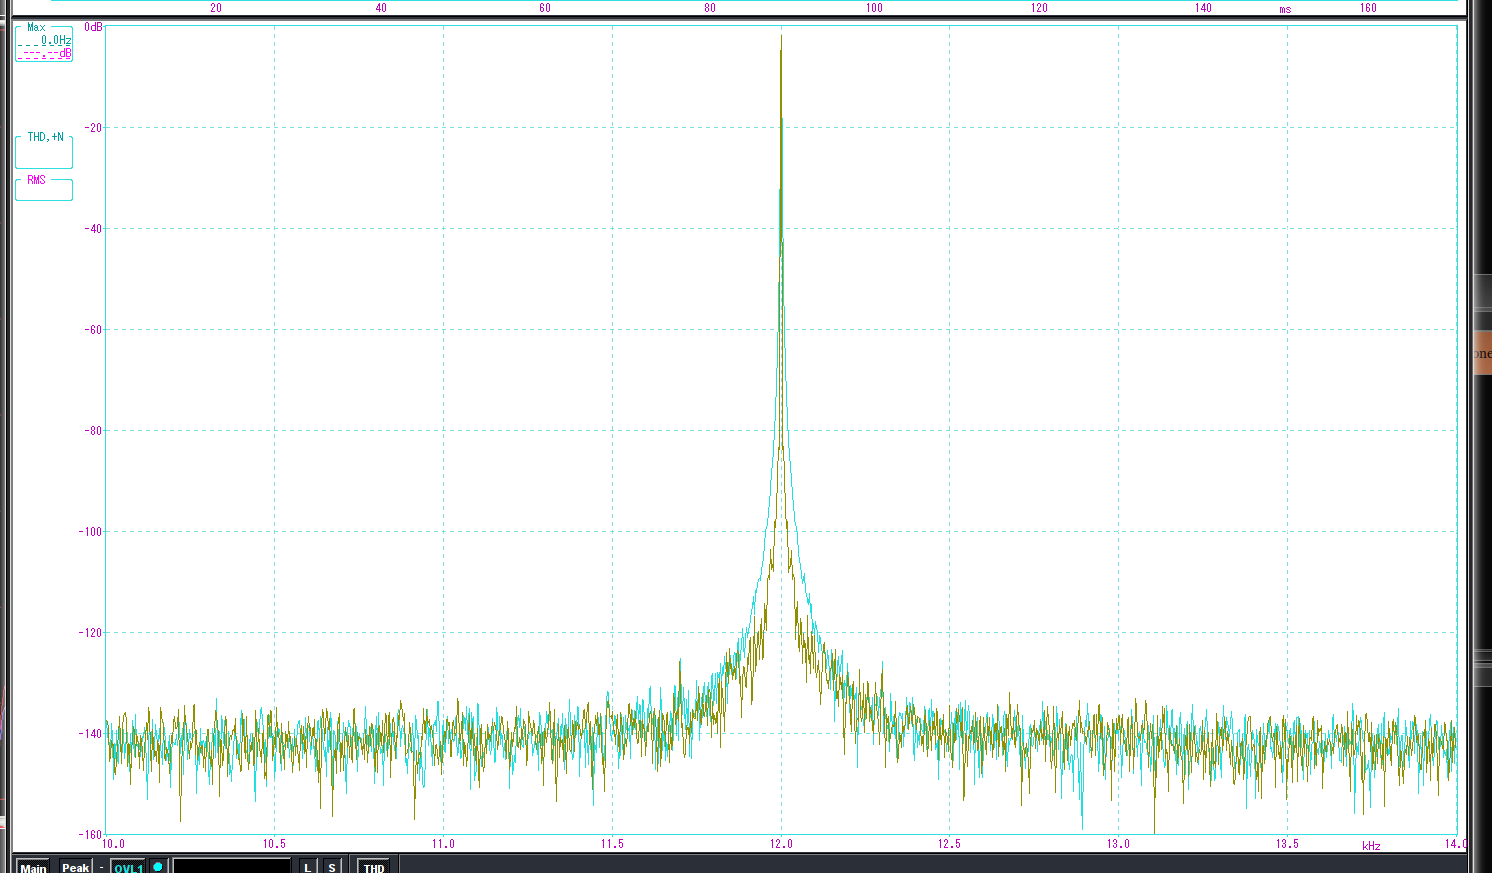 18i20 speed corr vs none 4000 hz wide.png